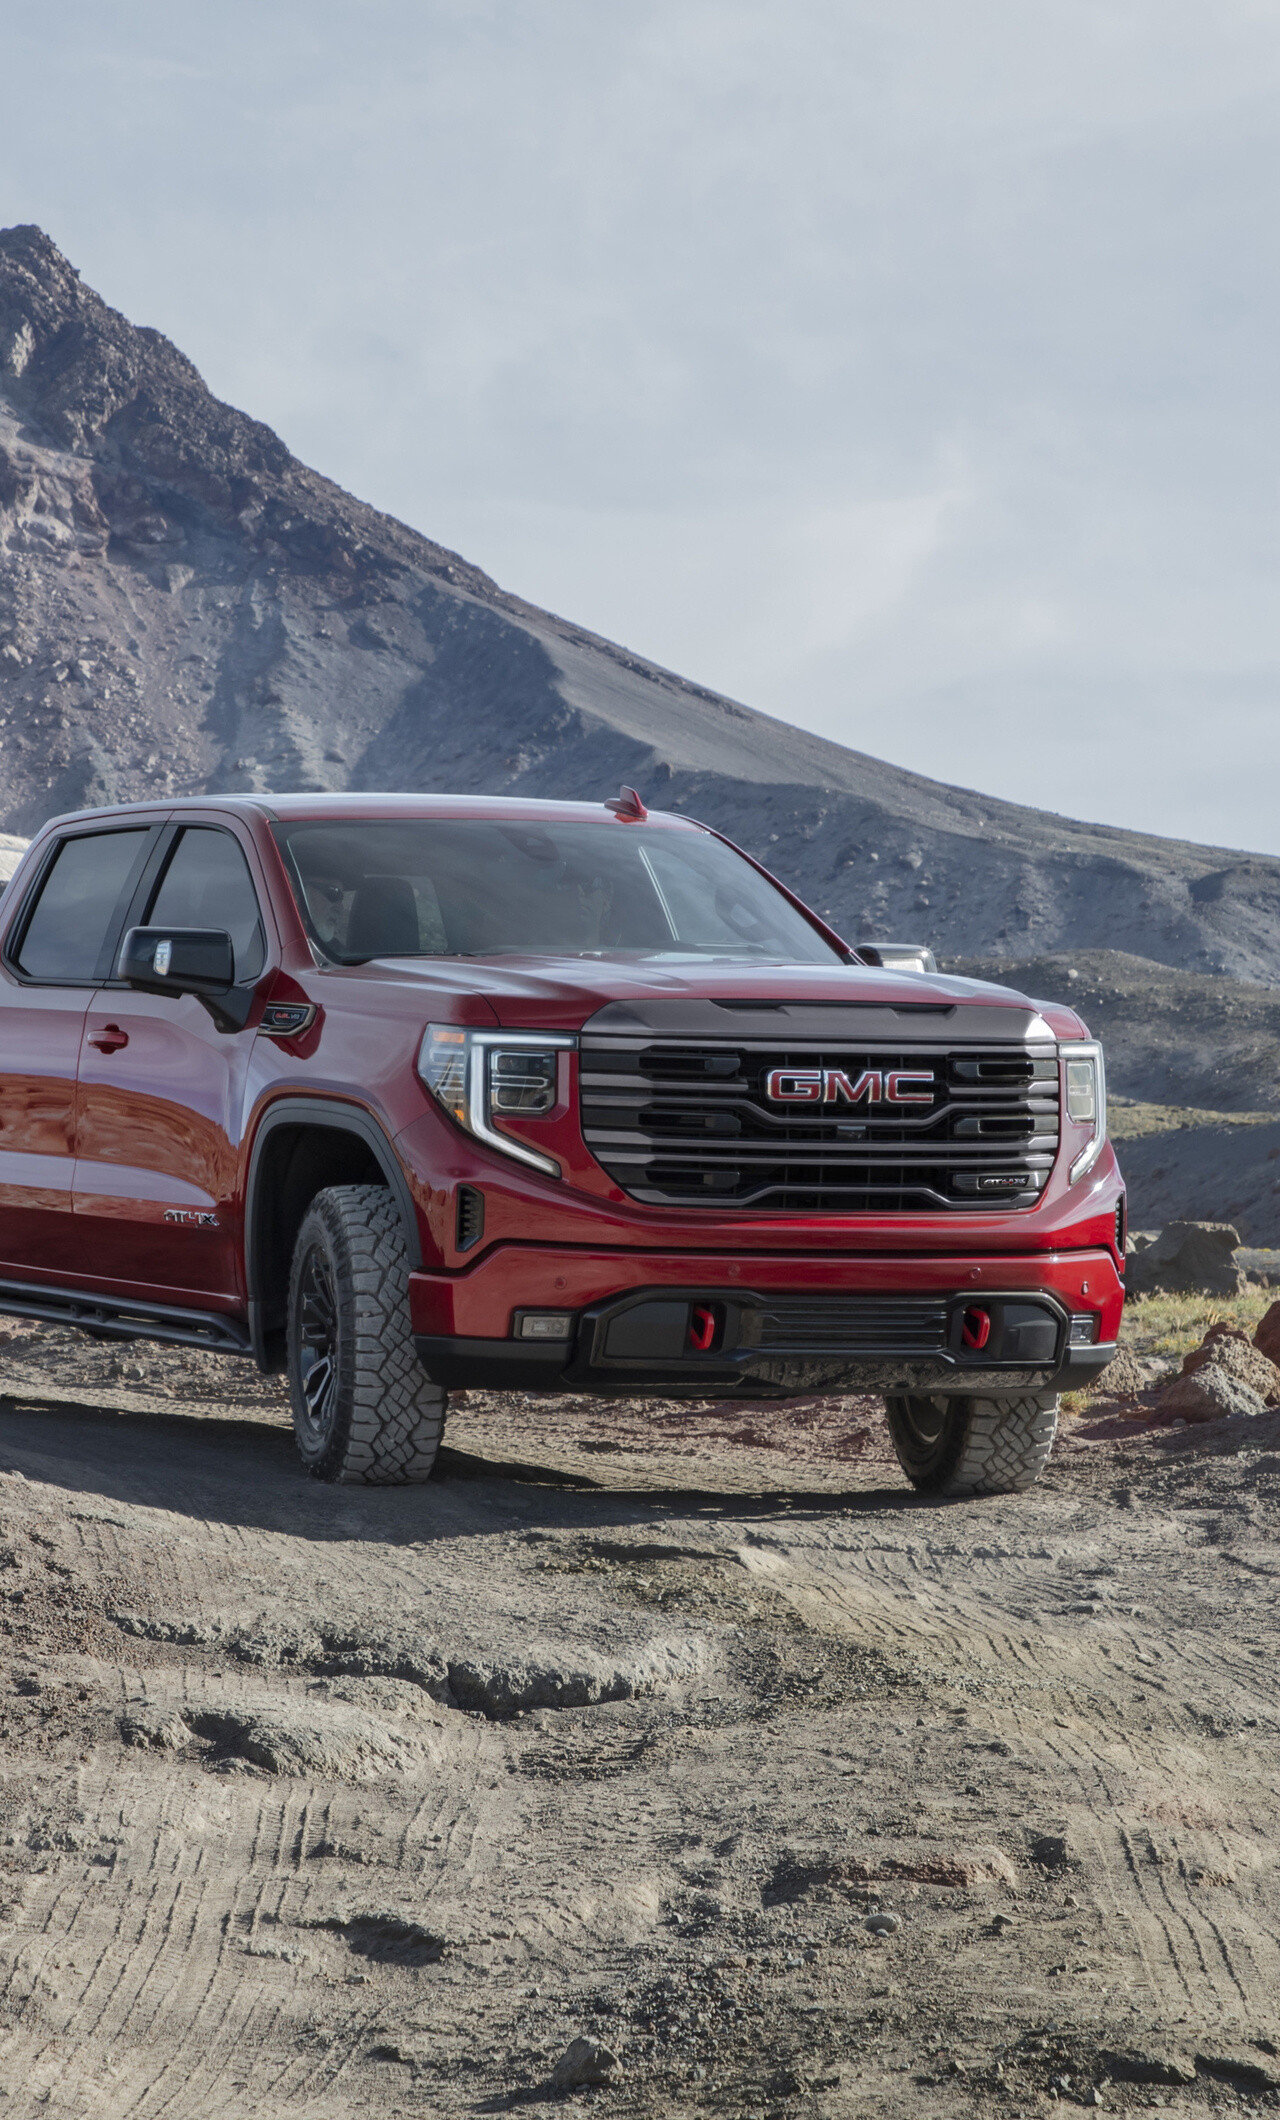 GMC Sierra: AT4X Crew Cab, Body style, A base 4.3-liter V6 engine that makes 285 horsepower. 1280x2120 HD Background.